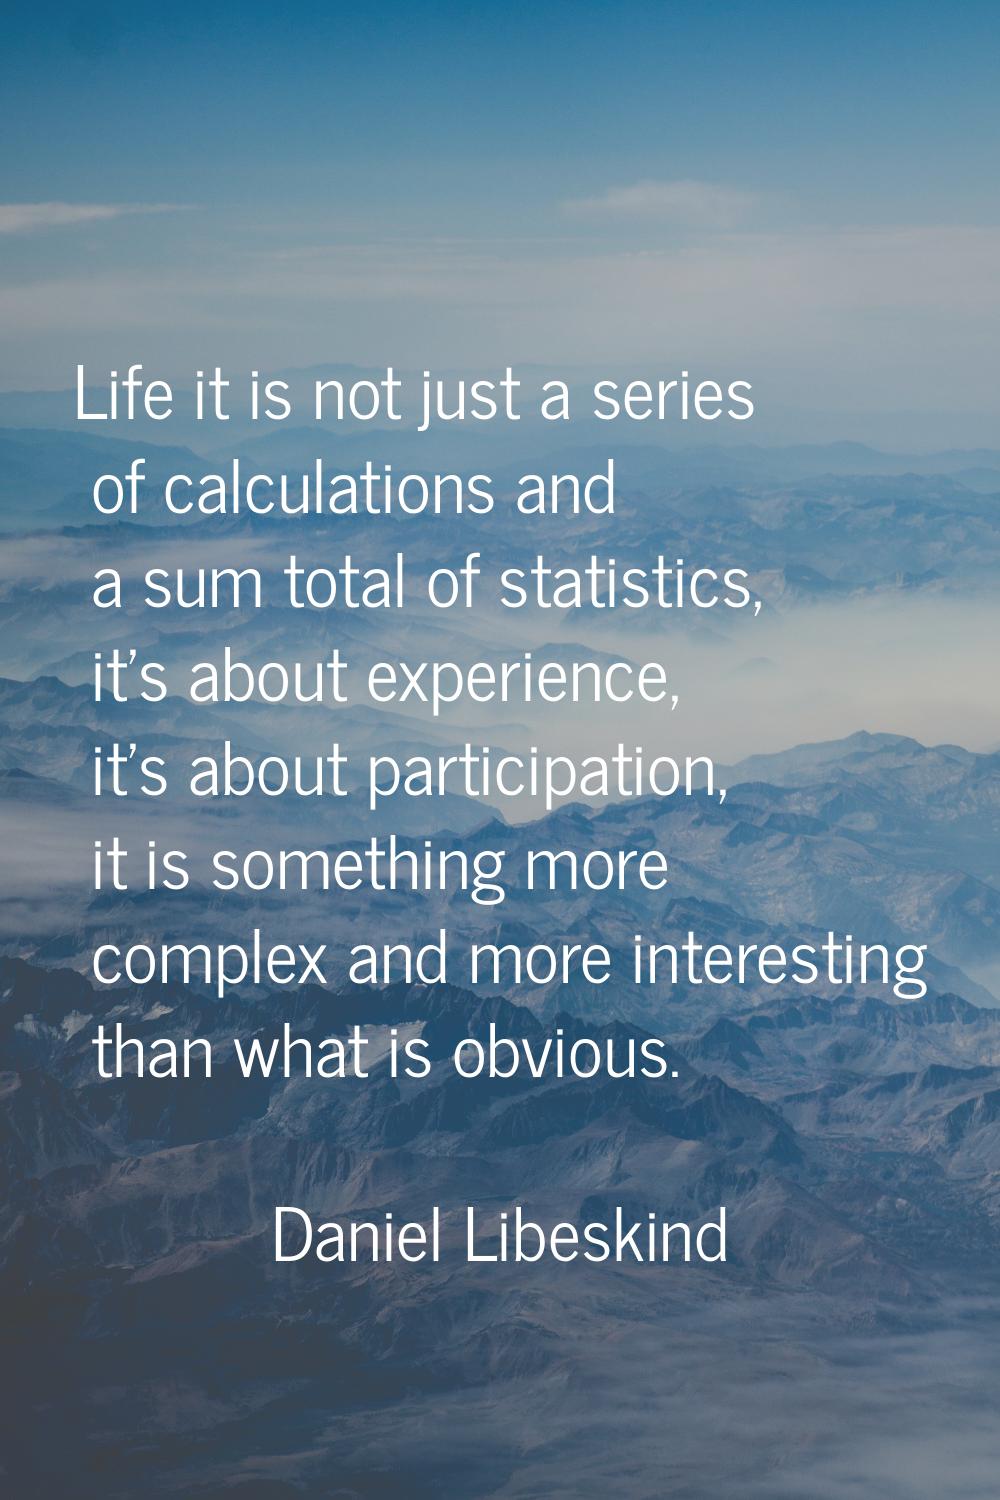 Life it is not just a series of calculations and a sum total of statistics, it's about experience, 